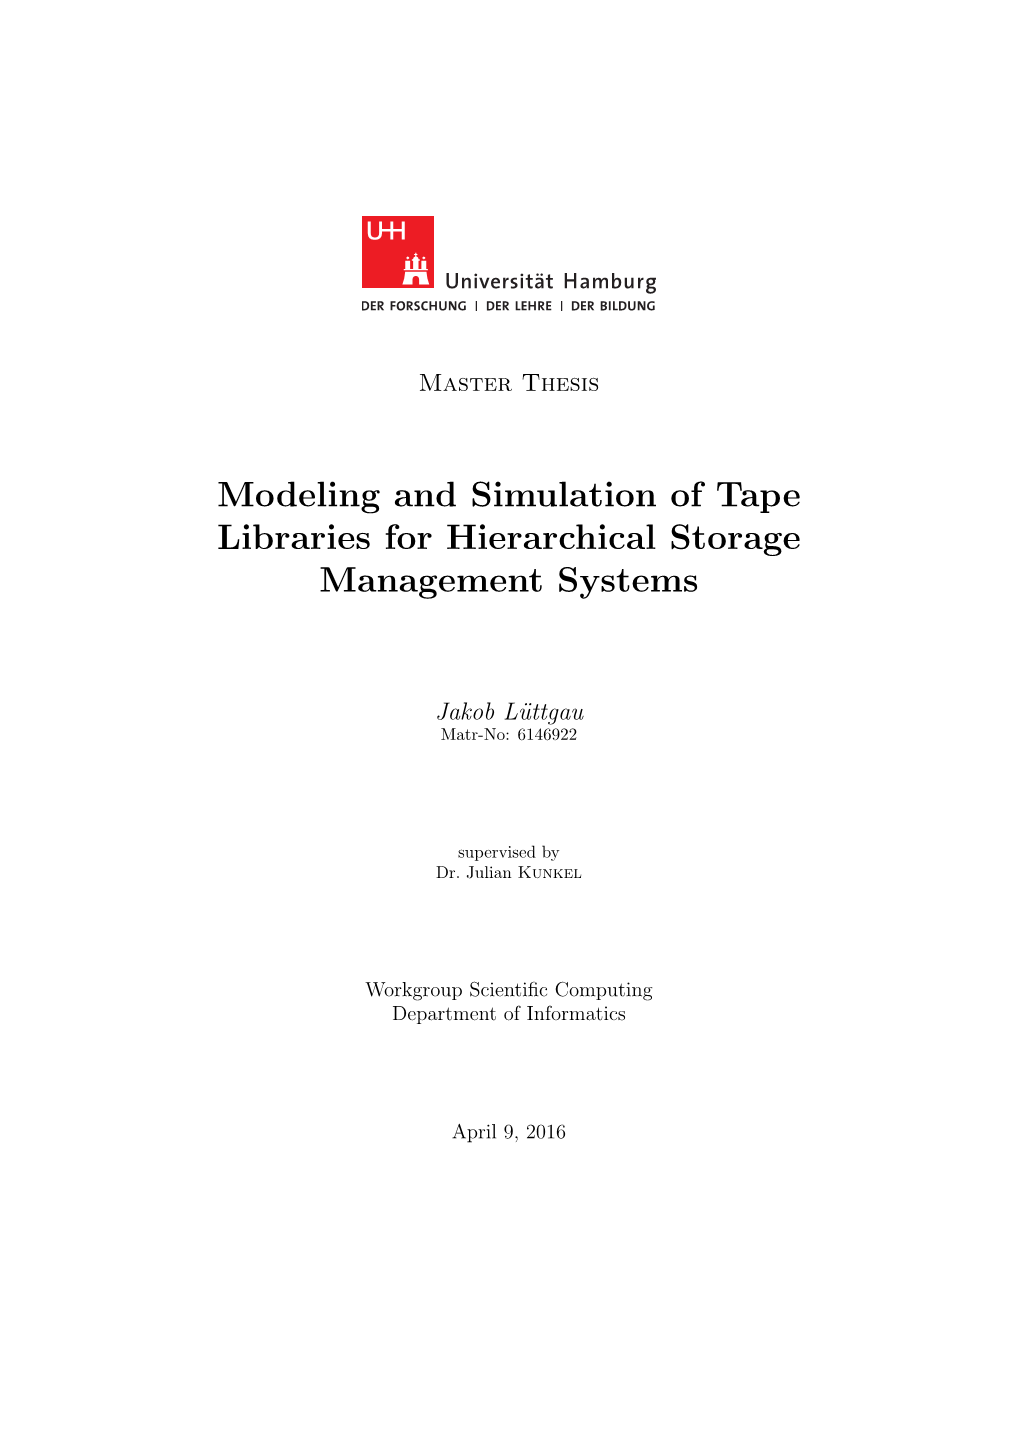 Modeling and Simulation of Tape Libraries for Hierarchical Storage Management Systems